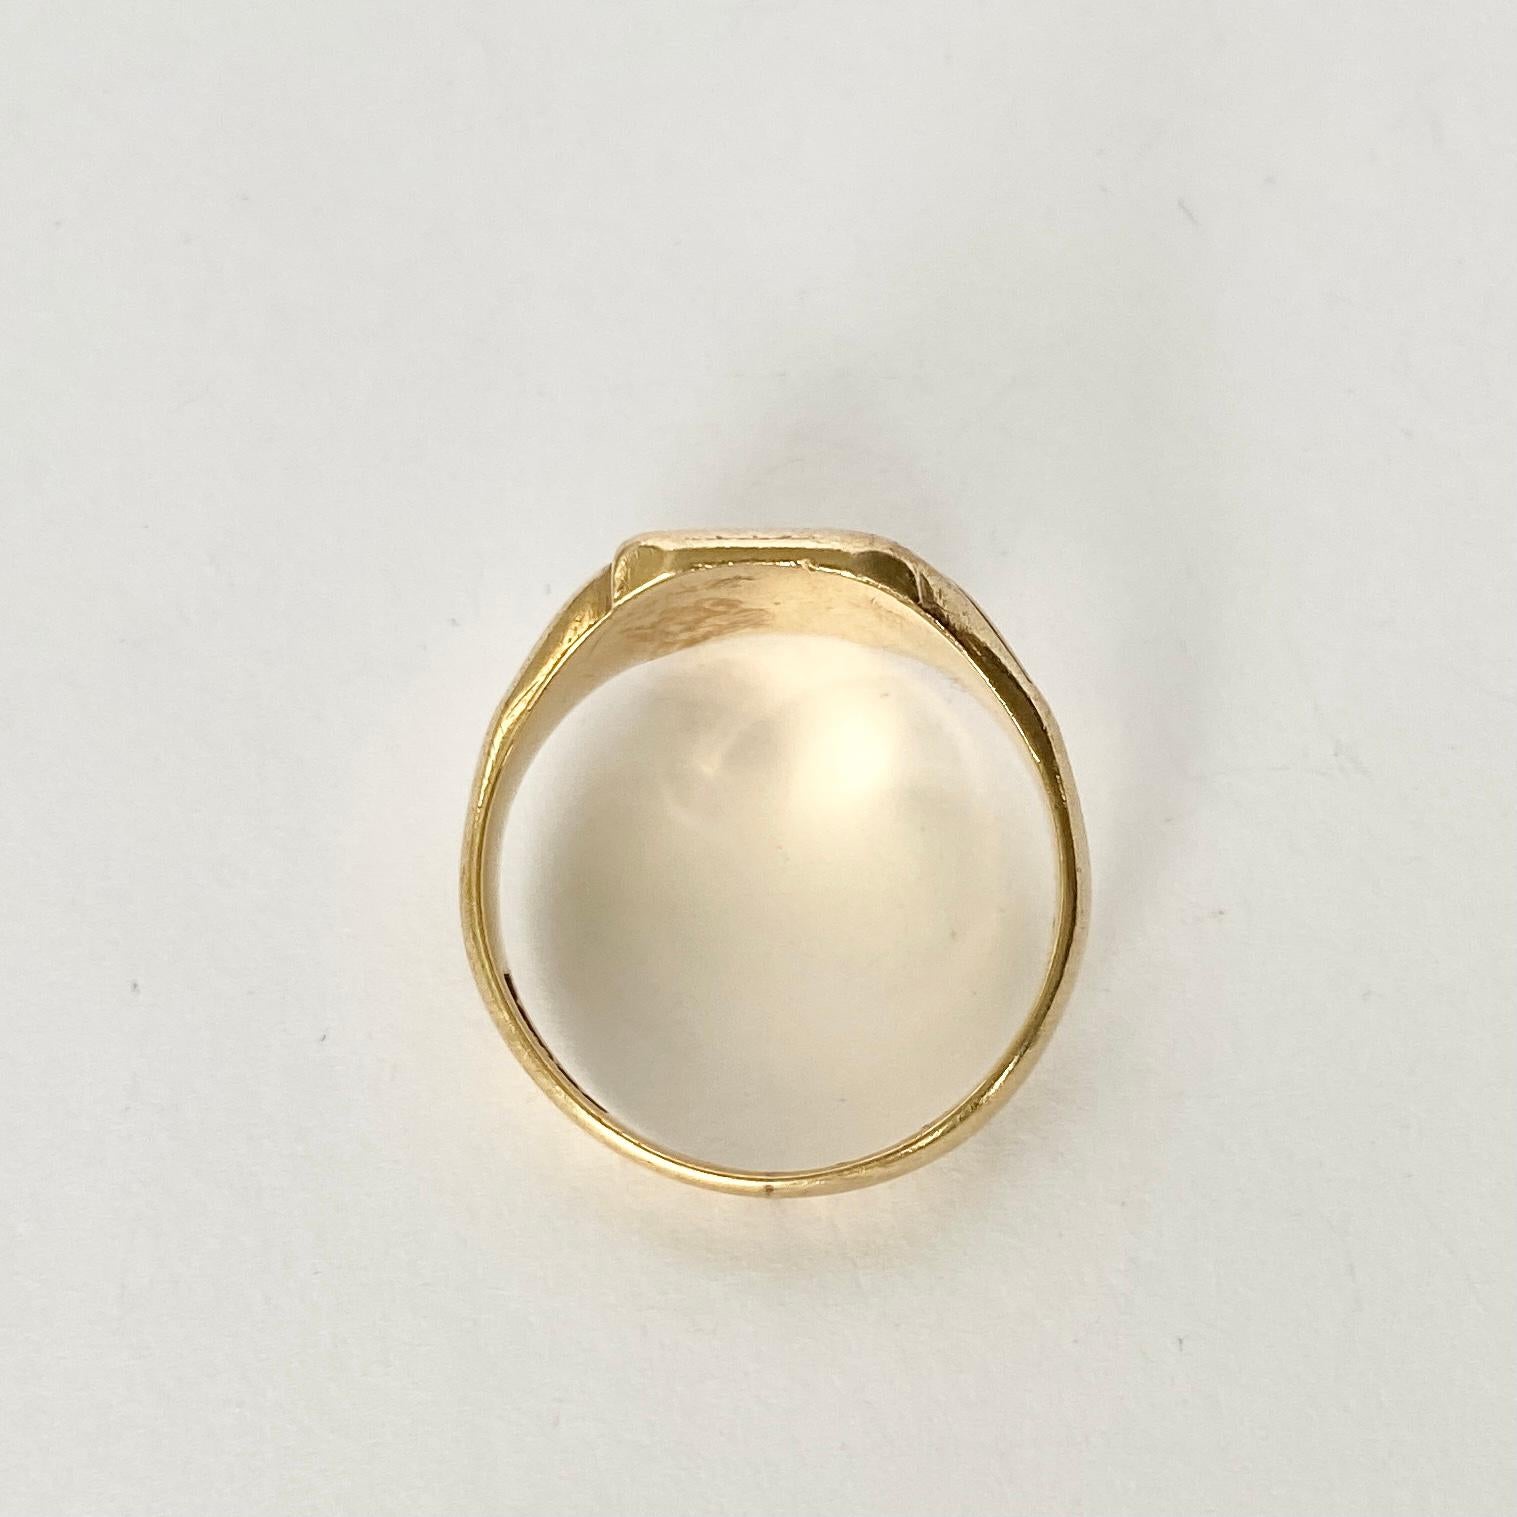 This sweet signet is modelled in 9ct gold and has a smooth face with detailed shoulders. Fully hallmarked Birmingham 1941.

Ring Size: W 1/2 or 11 1/4
Face Dimensions: 14x11mm 

Weight: 7.3g